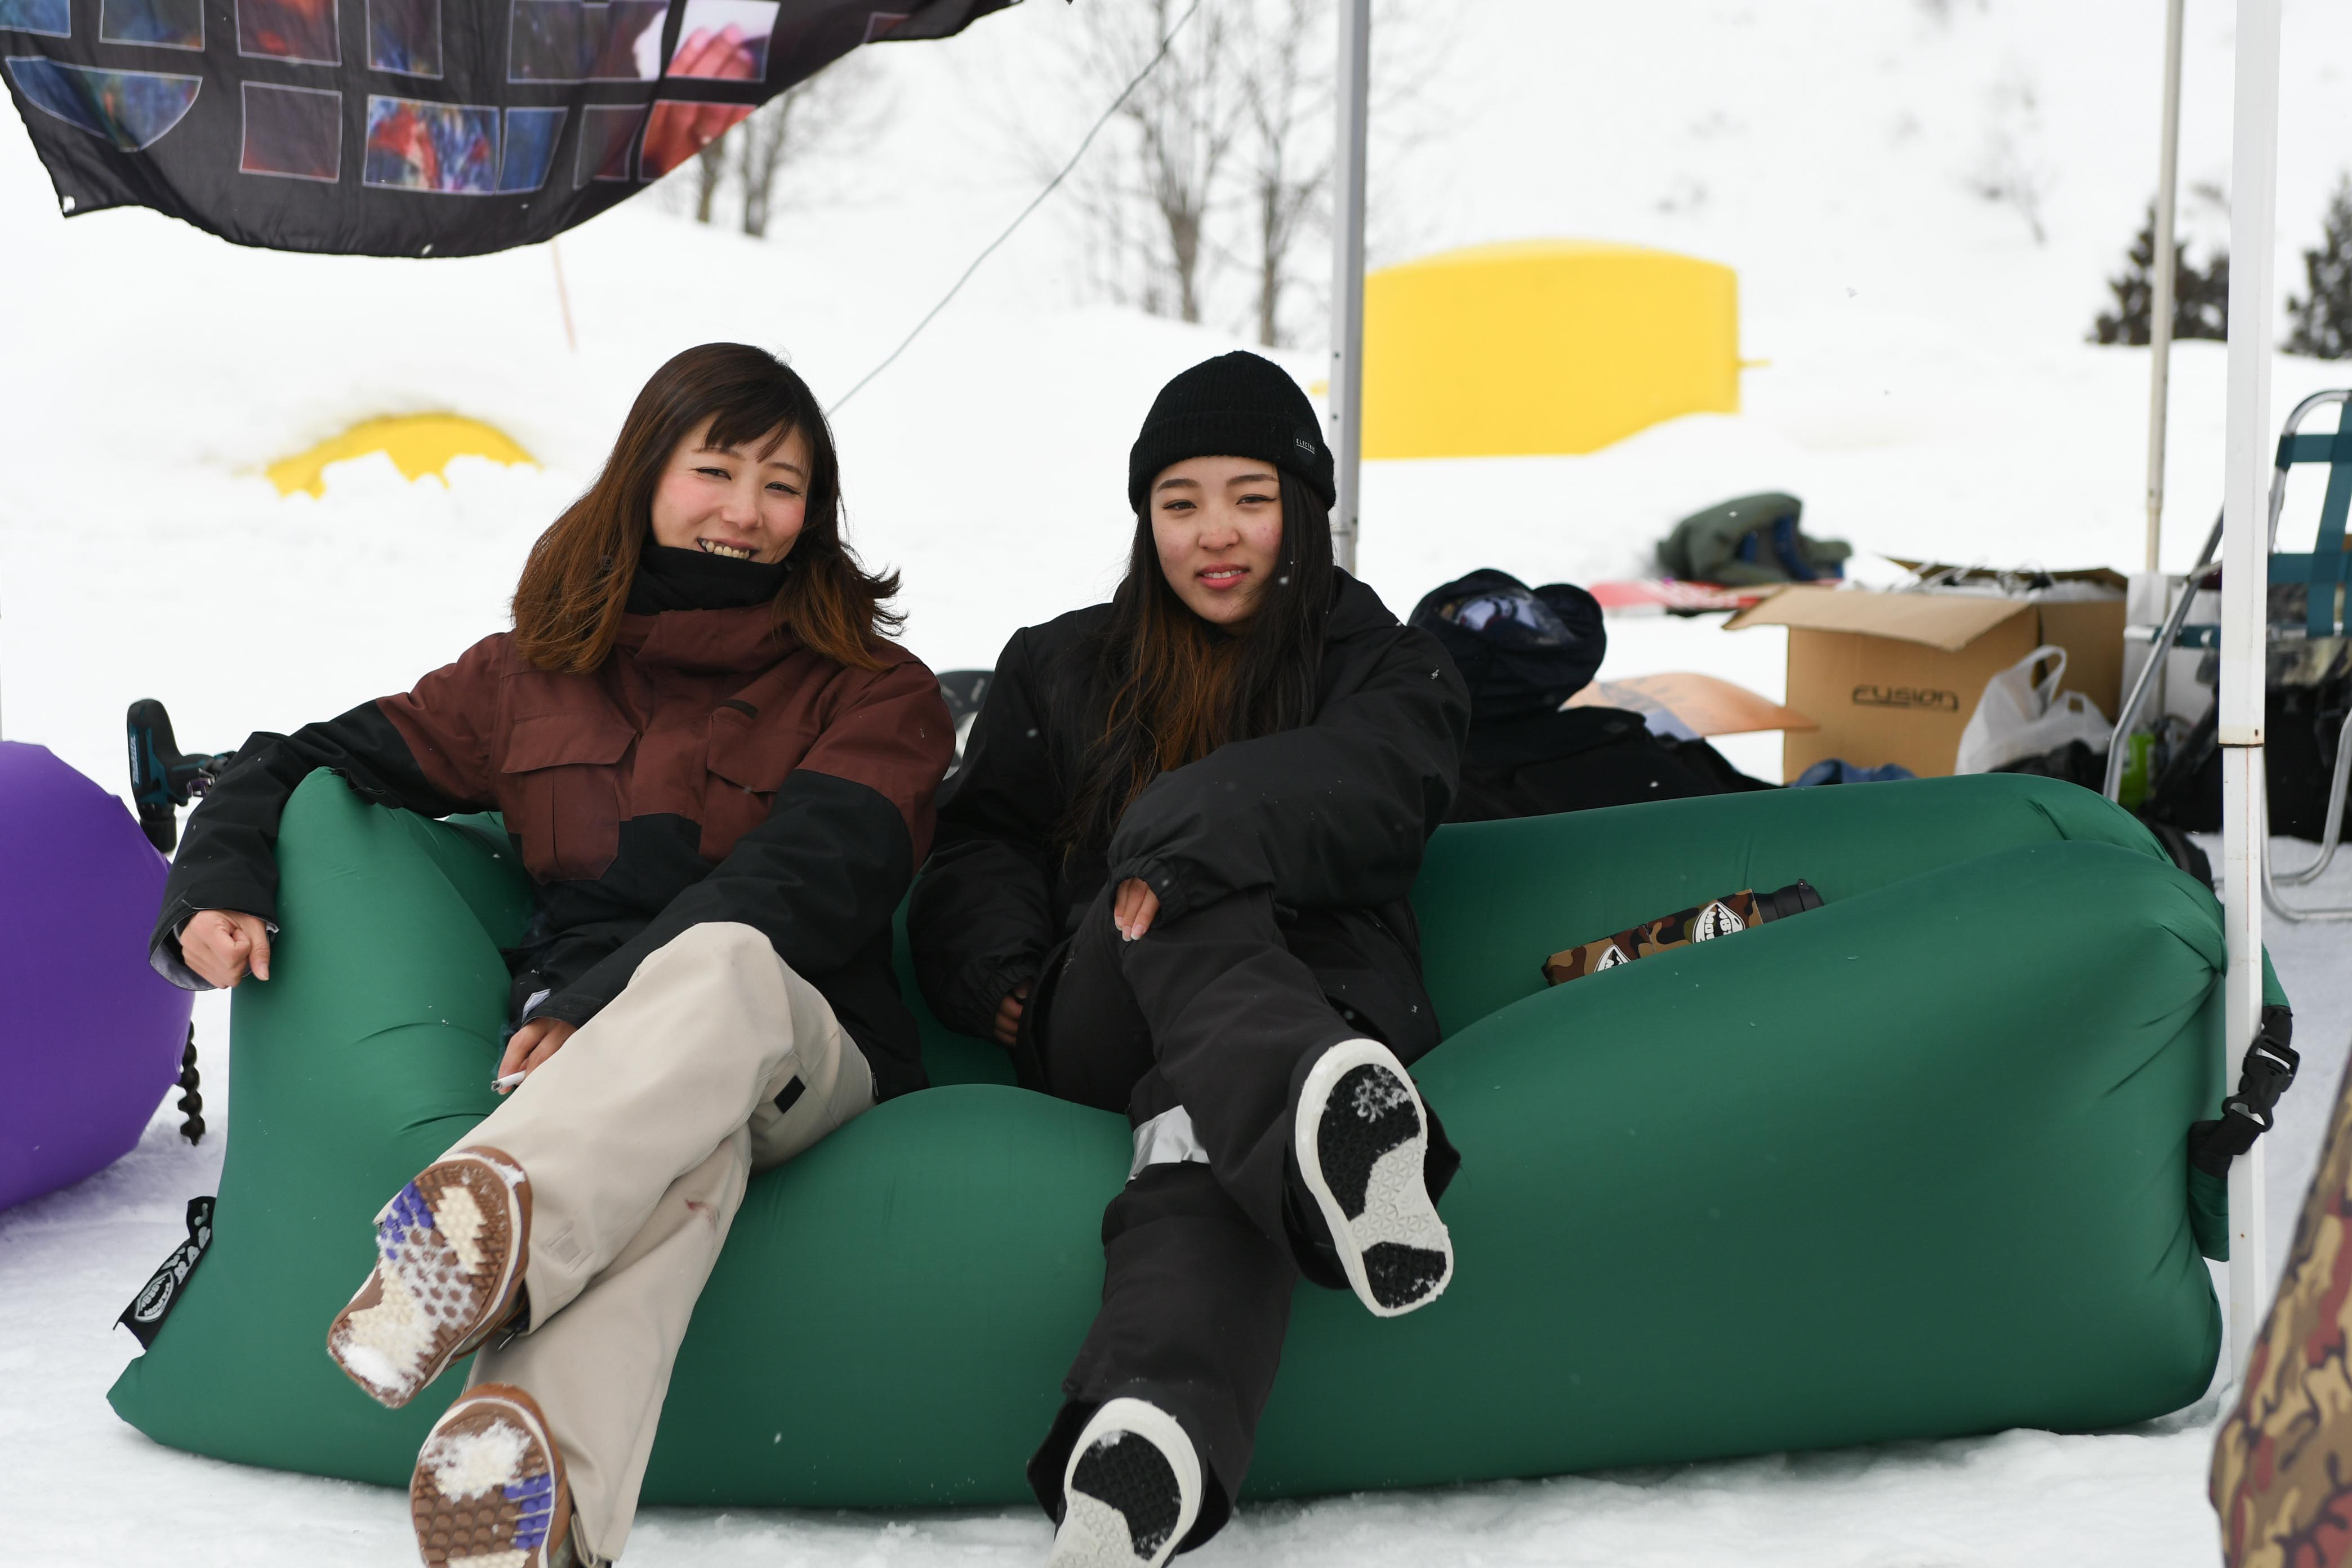 Girls snowboarders are also chilling at BIG MOUTH's CHILL BAG!